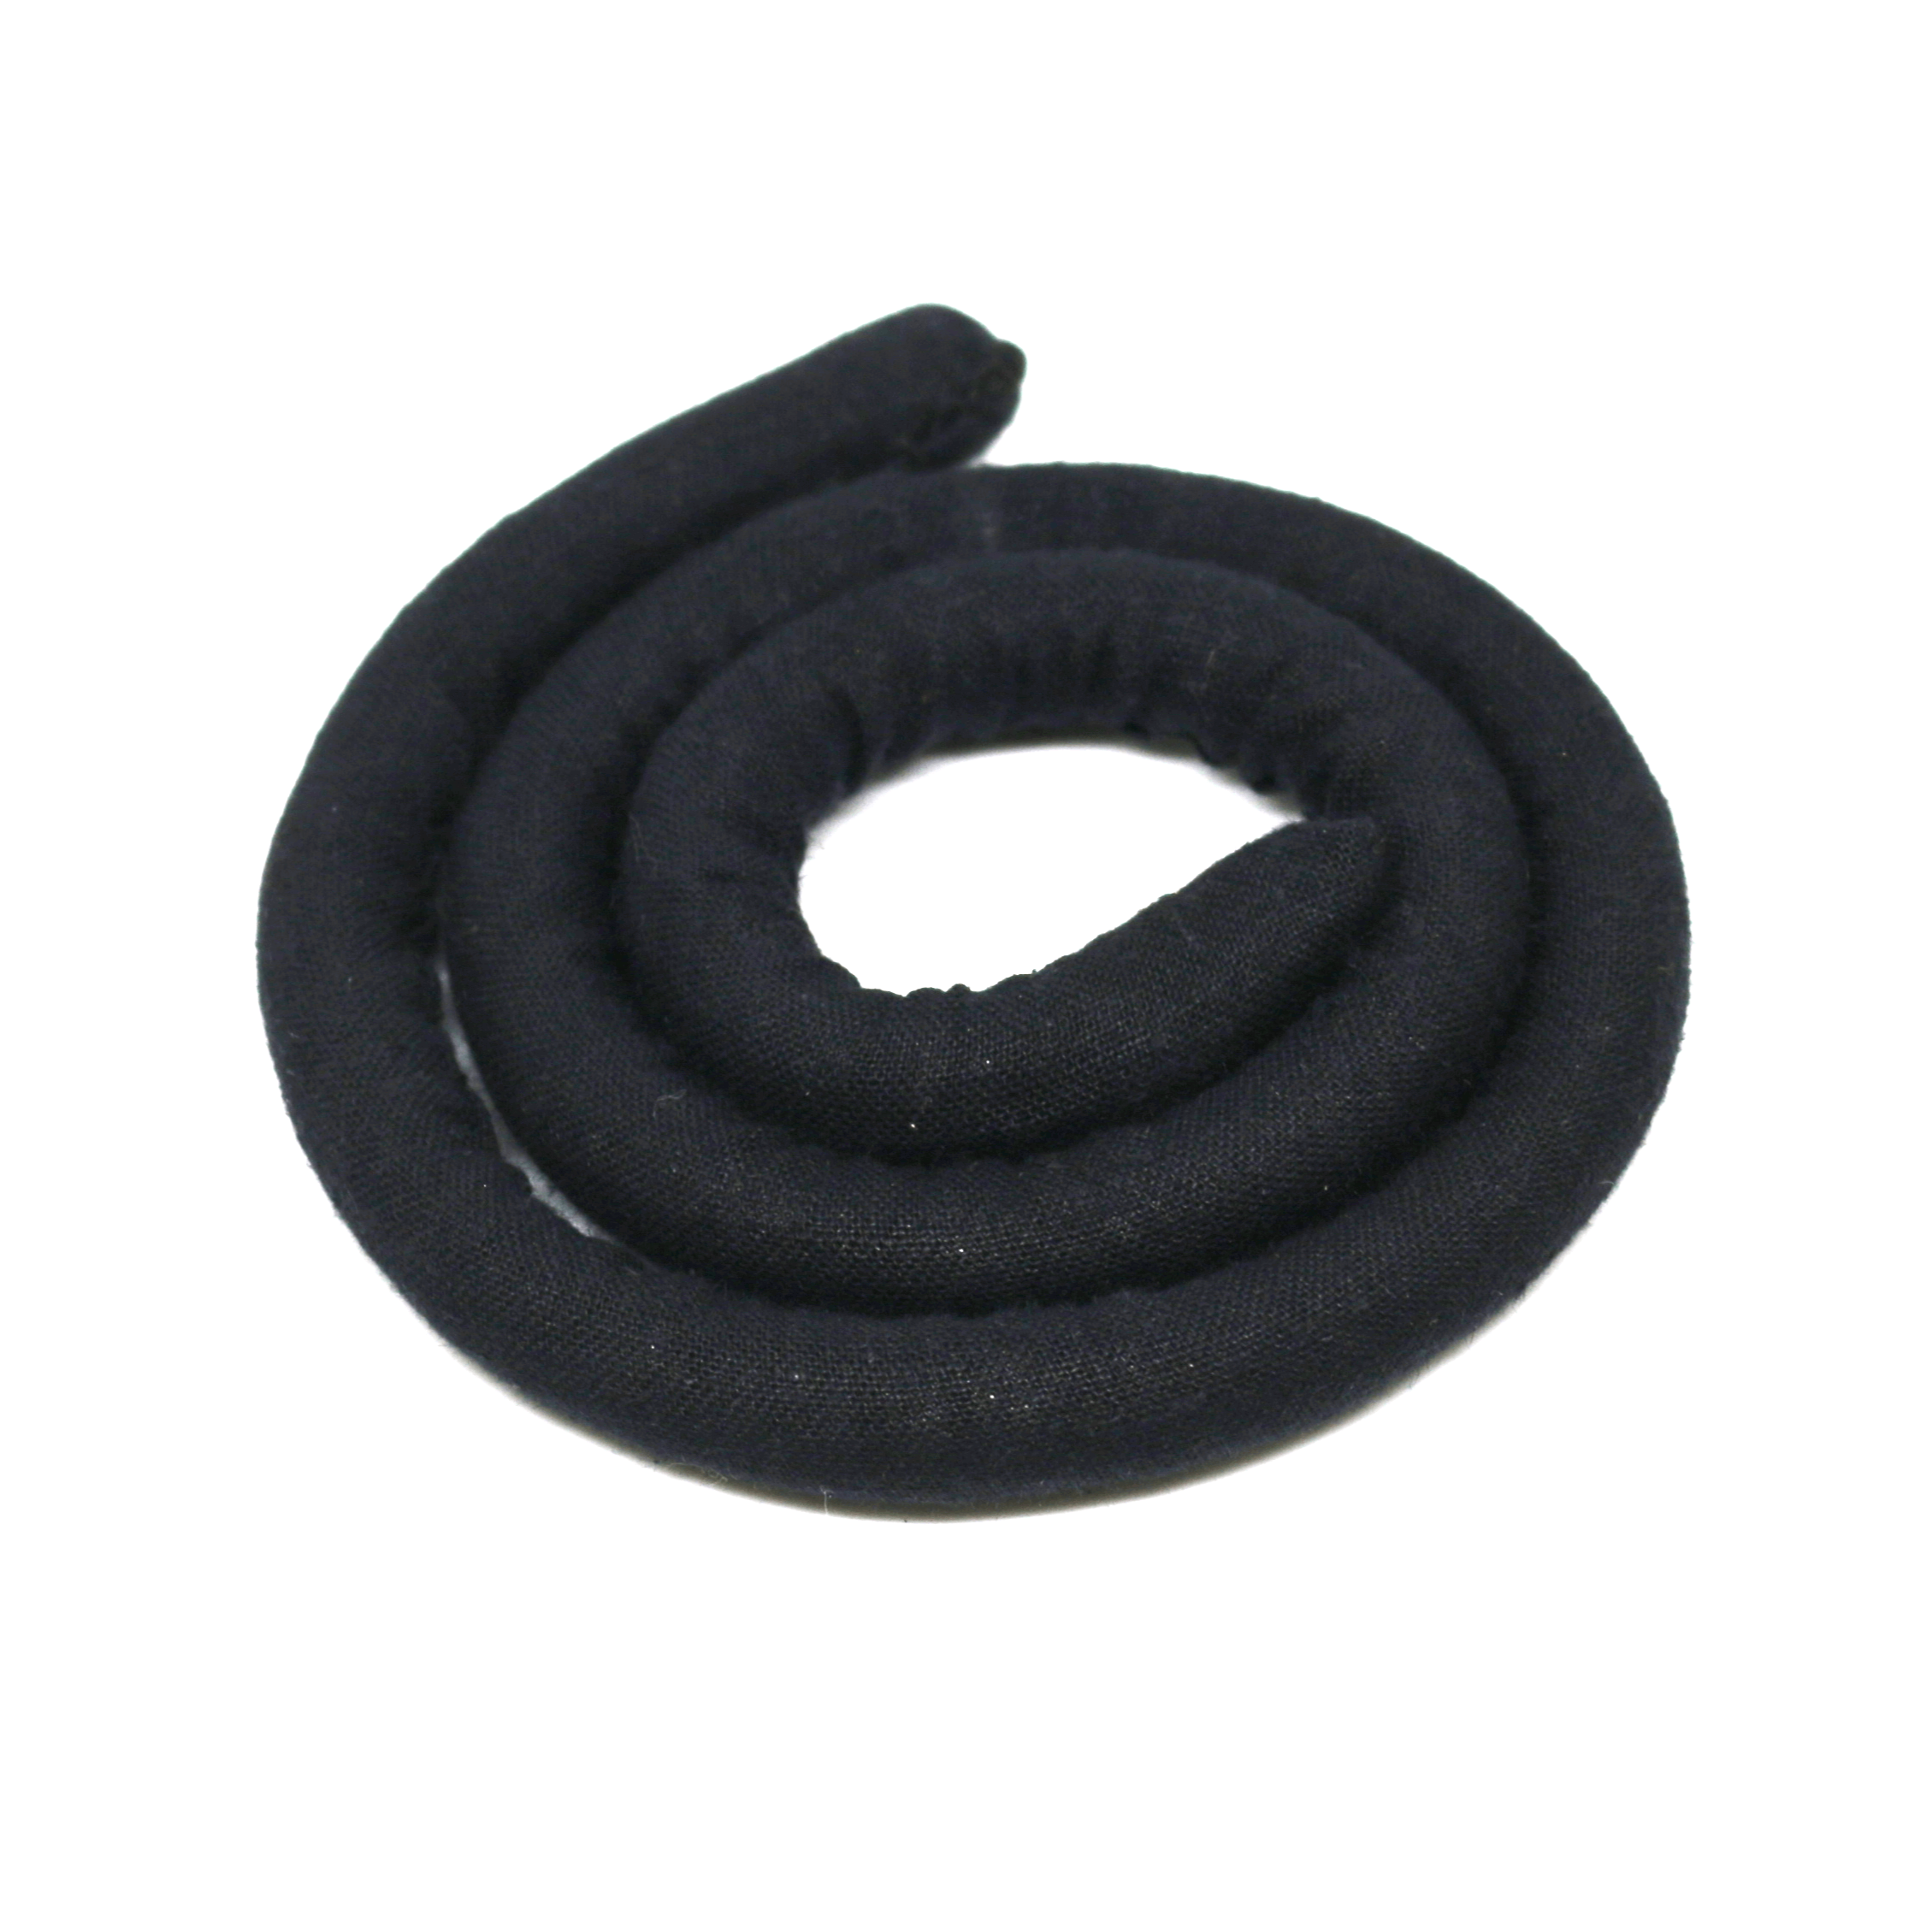 Black Hemp Spiralocks are highly recommended by dread heads around the world as the best way to tie your locks